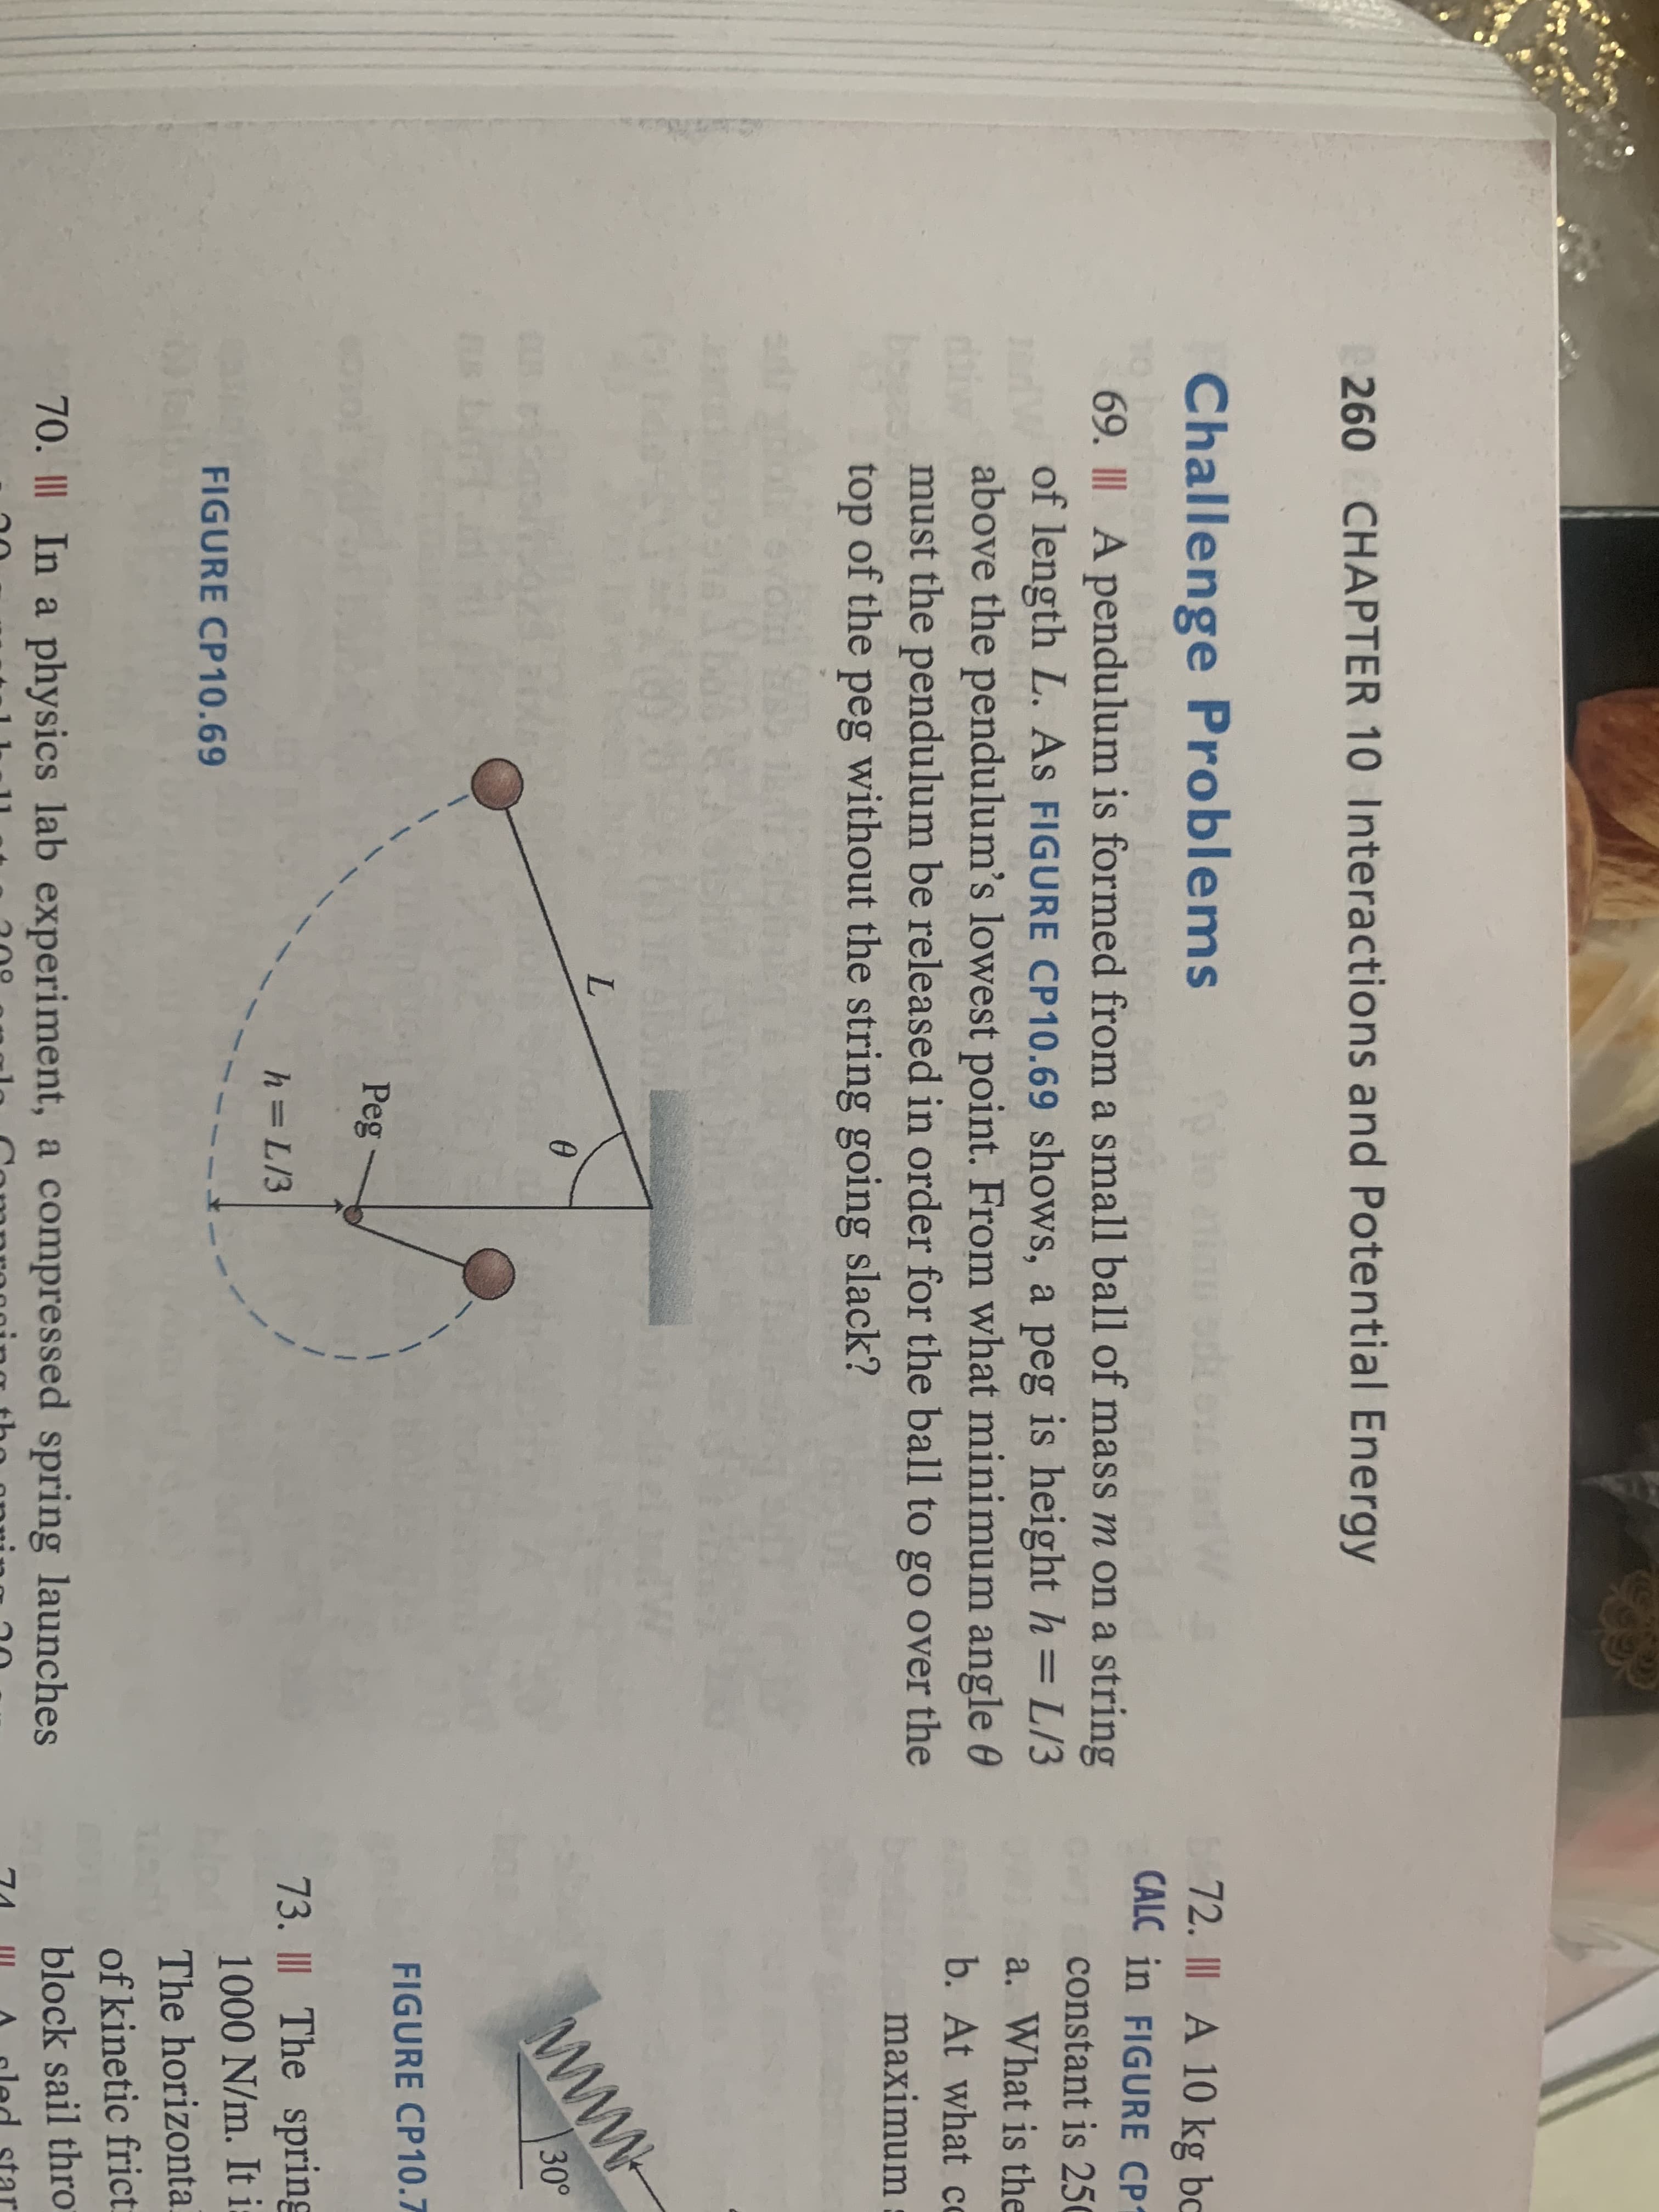 260 CHAPTER 10 Interactions and Potential Energy
Challenge Problems
72. I A 10 kg bc
CALC in FIGURE CP1
69. I A pendulum is formed from a small ball of mass m on a string
of length L. As FIGURE CP10.69 shows, a peg is height h=L/3
above the pendulum's lowest point. From what minimum angle 0
must the pendulum be released in order for the ball to go over the
constant is 250
a. What is the
b. At what co
top of the peg without the string going slack?
maximum
www
30°
FIGURE CP10.7
Peg
73. II The spring
1000 N/m. It :
h=L/3
FIGURE CP10.69
The horizonta
of kinetic frict:
70. II In a physics lab experiment, a compressed spring launches
block sail thro
